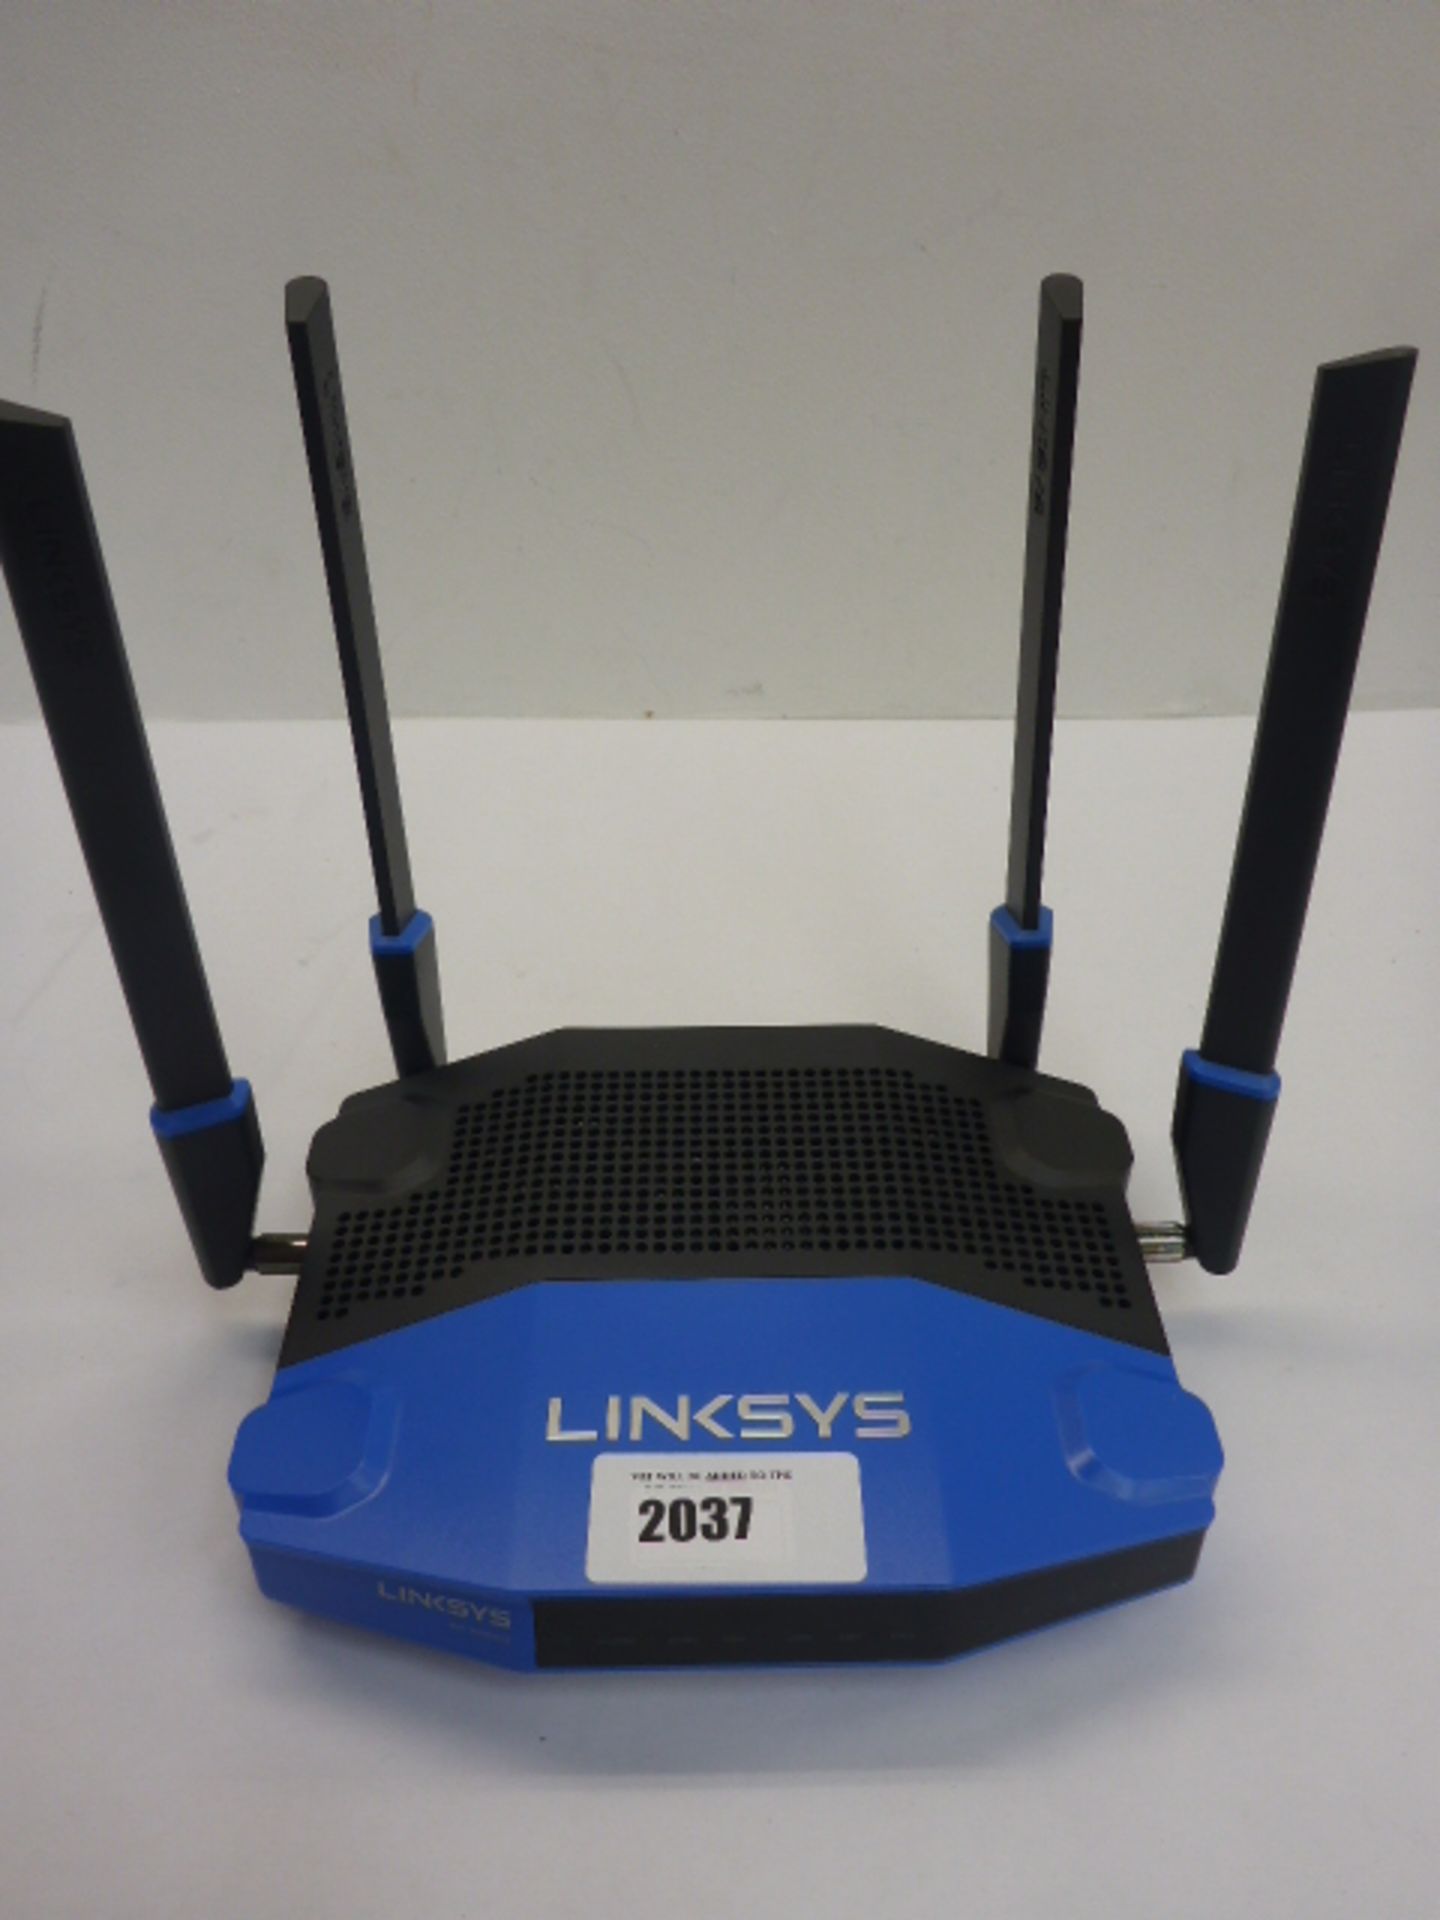 Linksys WRT 1900 ACS router with three antenna